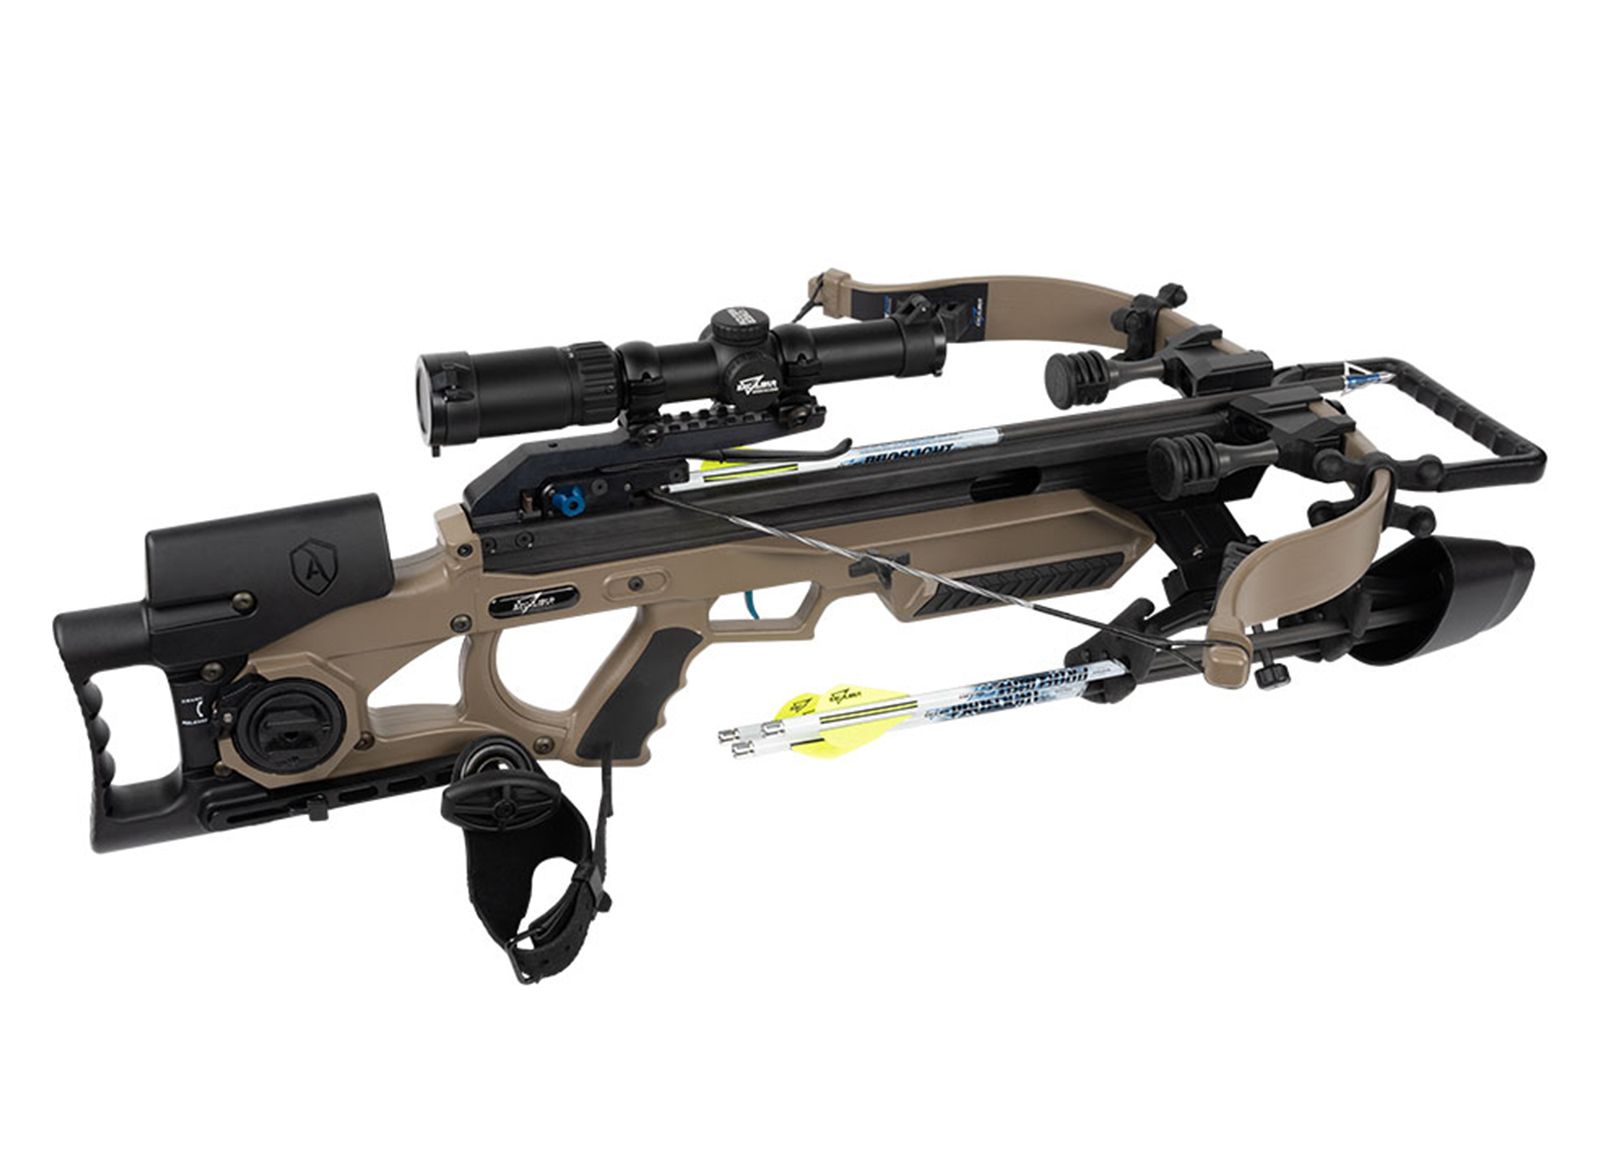 EXCALIBUR BALESTRA PACKAGE ASSASSIN EXTREME FDE WITH OVERWATCH SCOPE